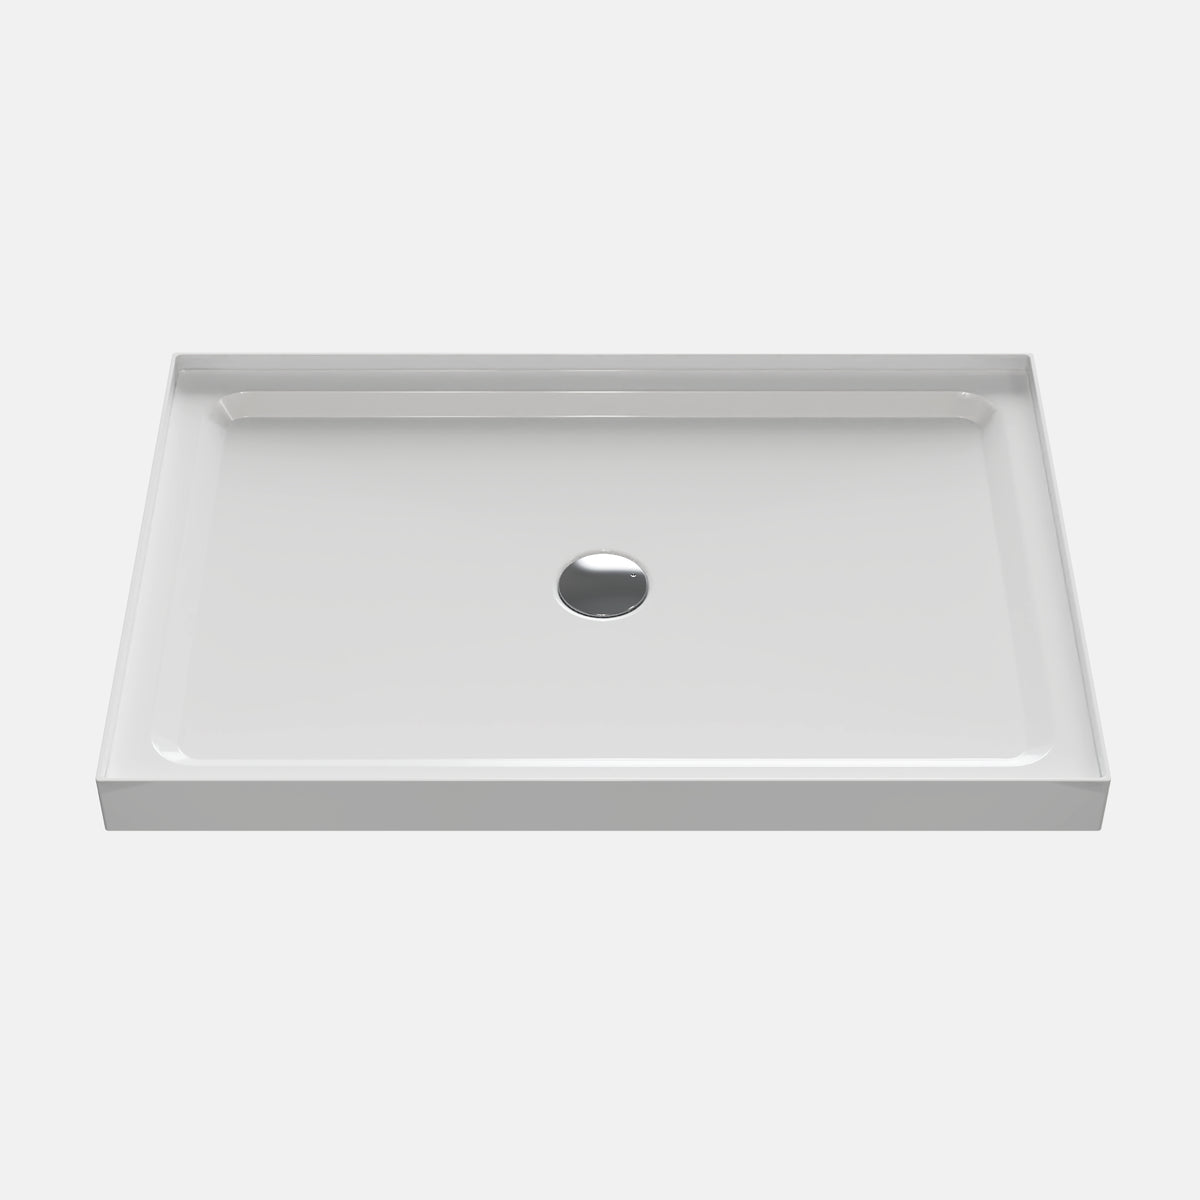 32"X48" Shower Base Shower Pan White with Drain